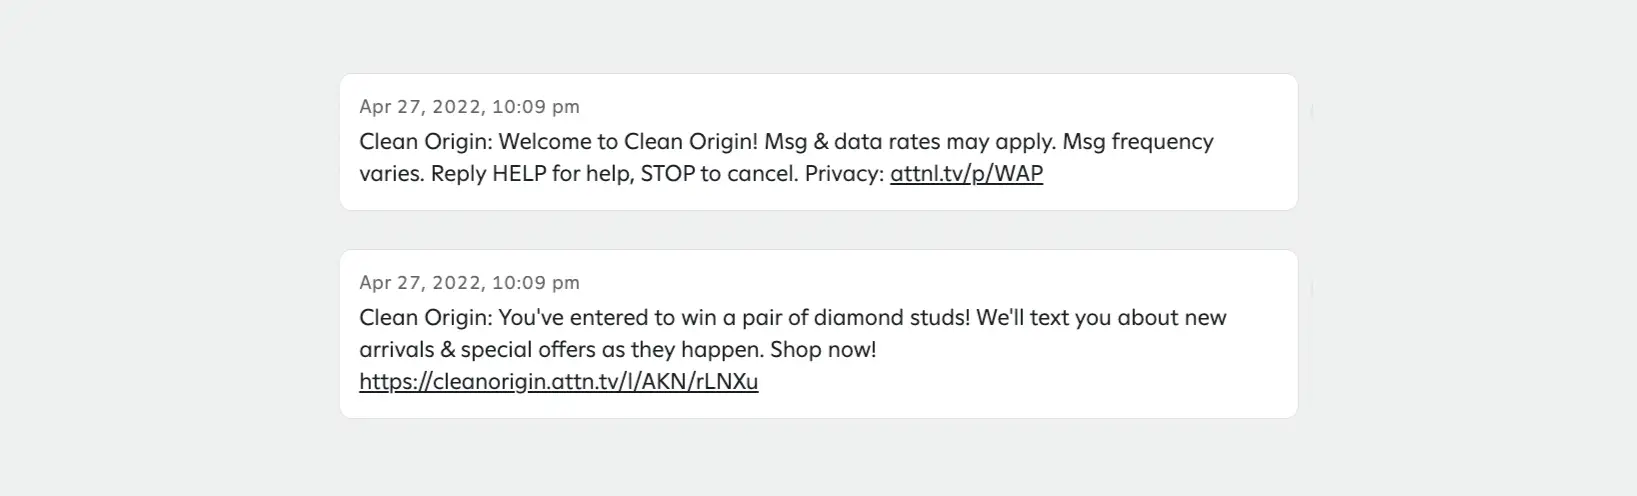 A confirmation SMS sent from Clean Origin informing the user that they have opted into receiving text messages.